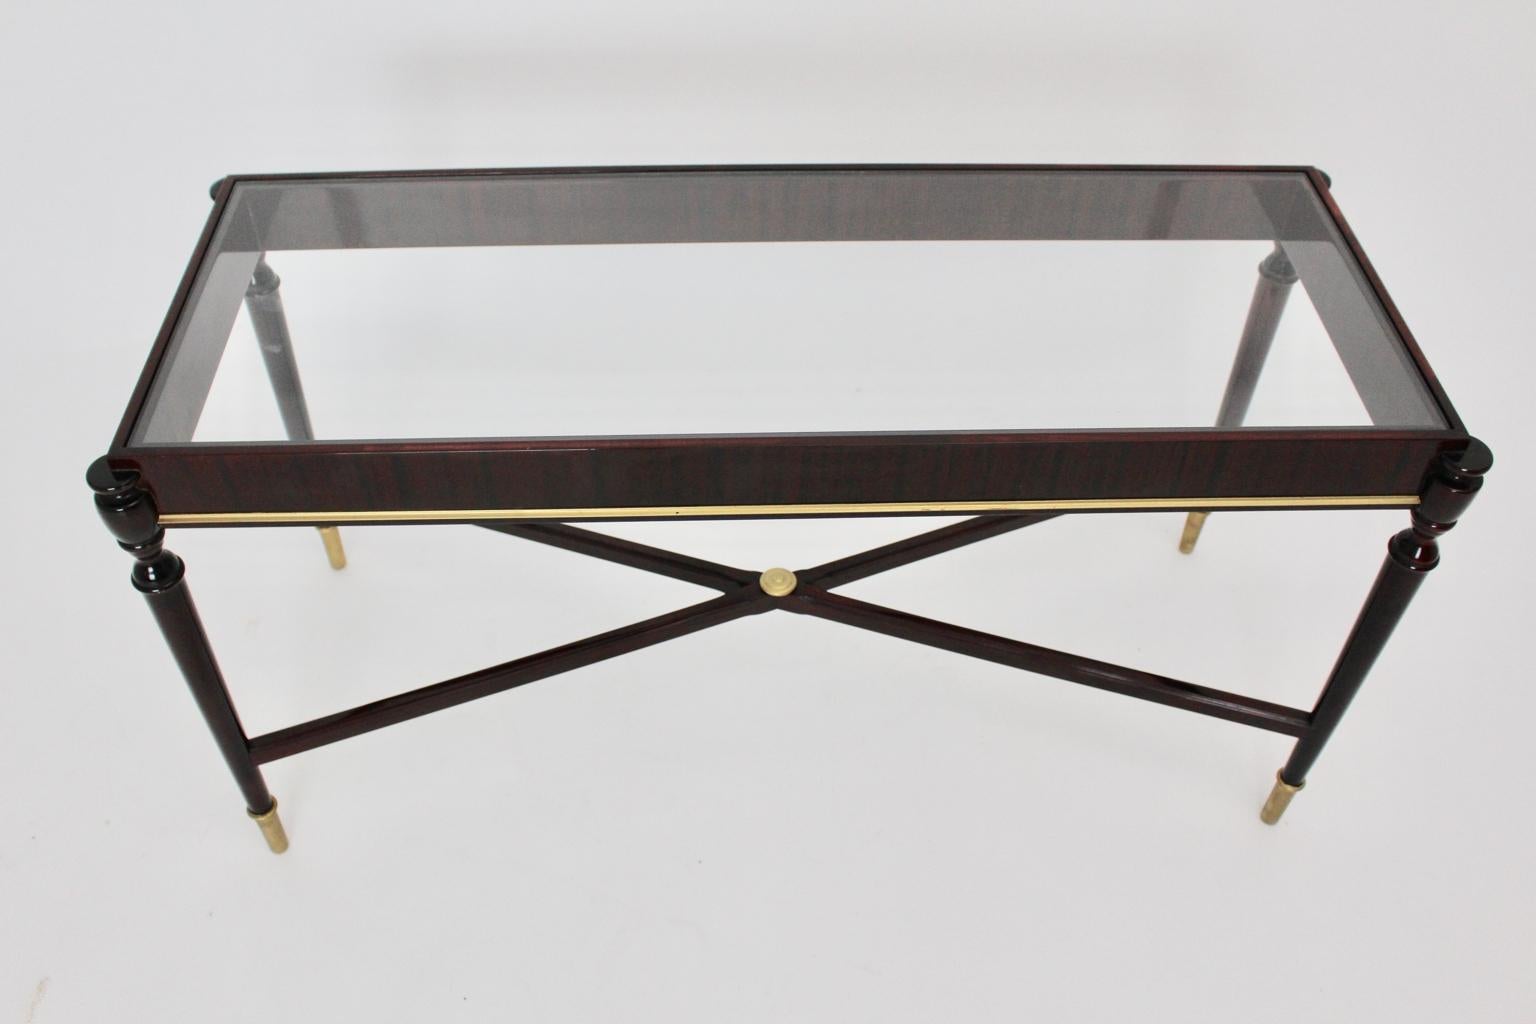 20th Century Mid-Century Modern Vintage Coffee Table Attributed to Paolo Buffa, Italy 1940s For Sale